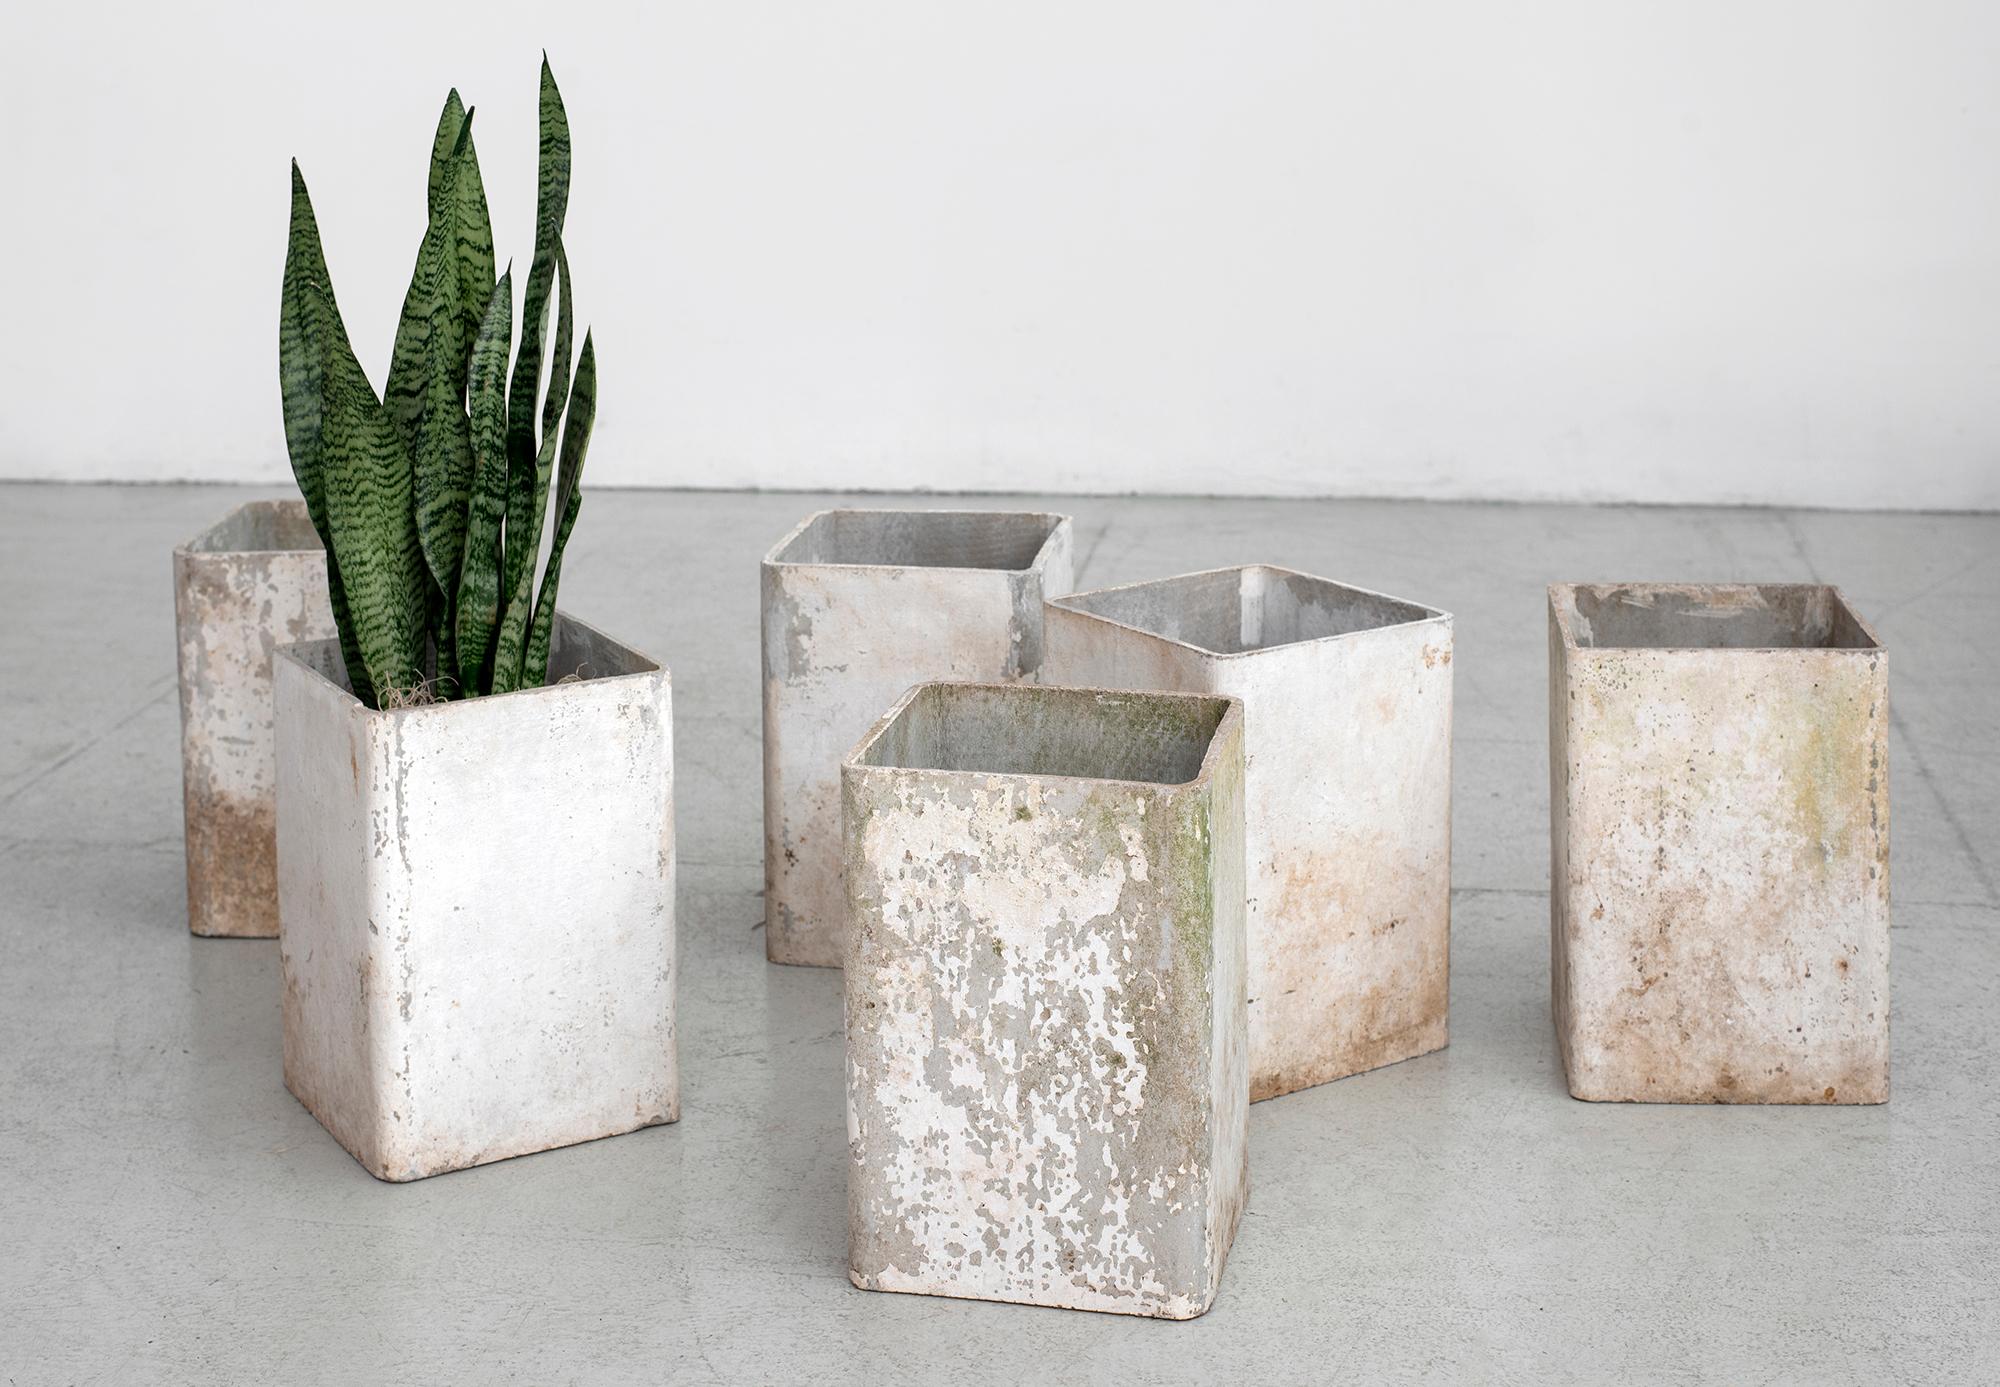 Tall shaped Concrete planters with holes for drainage by Willy Guhl 
Great patina
Great function.